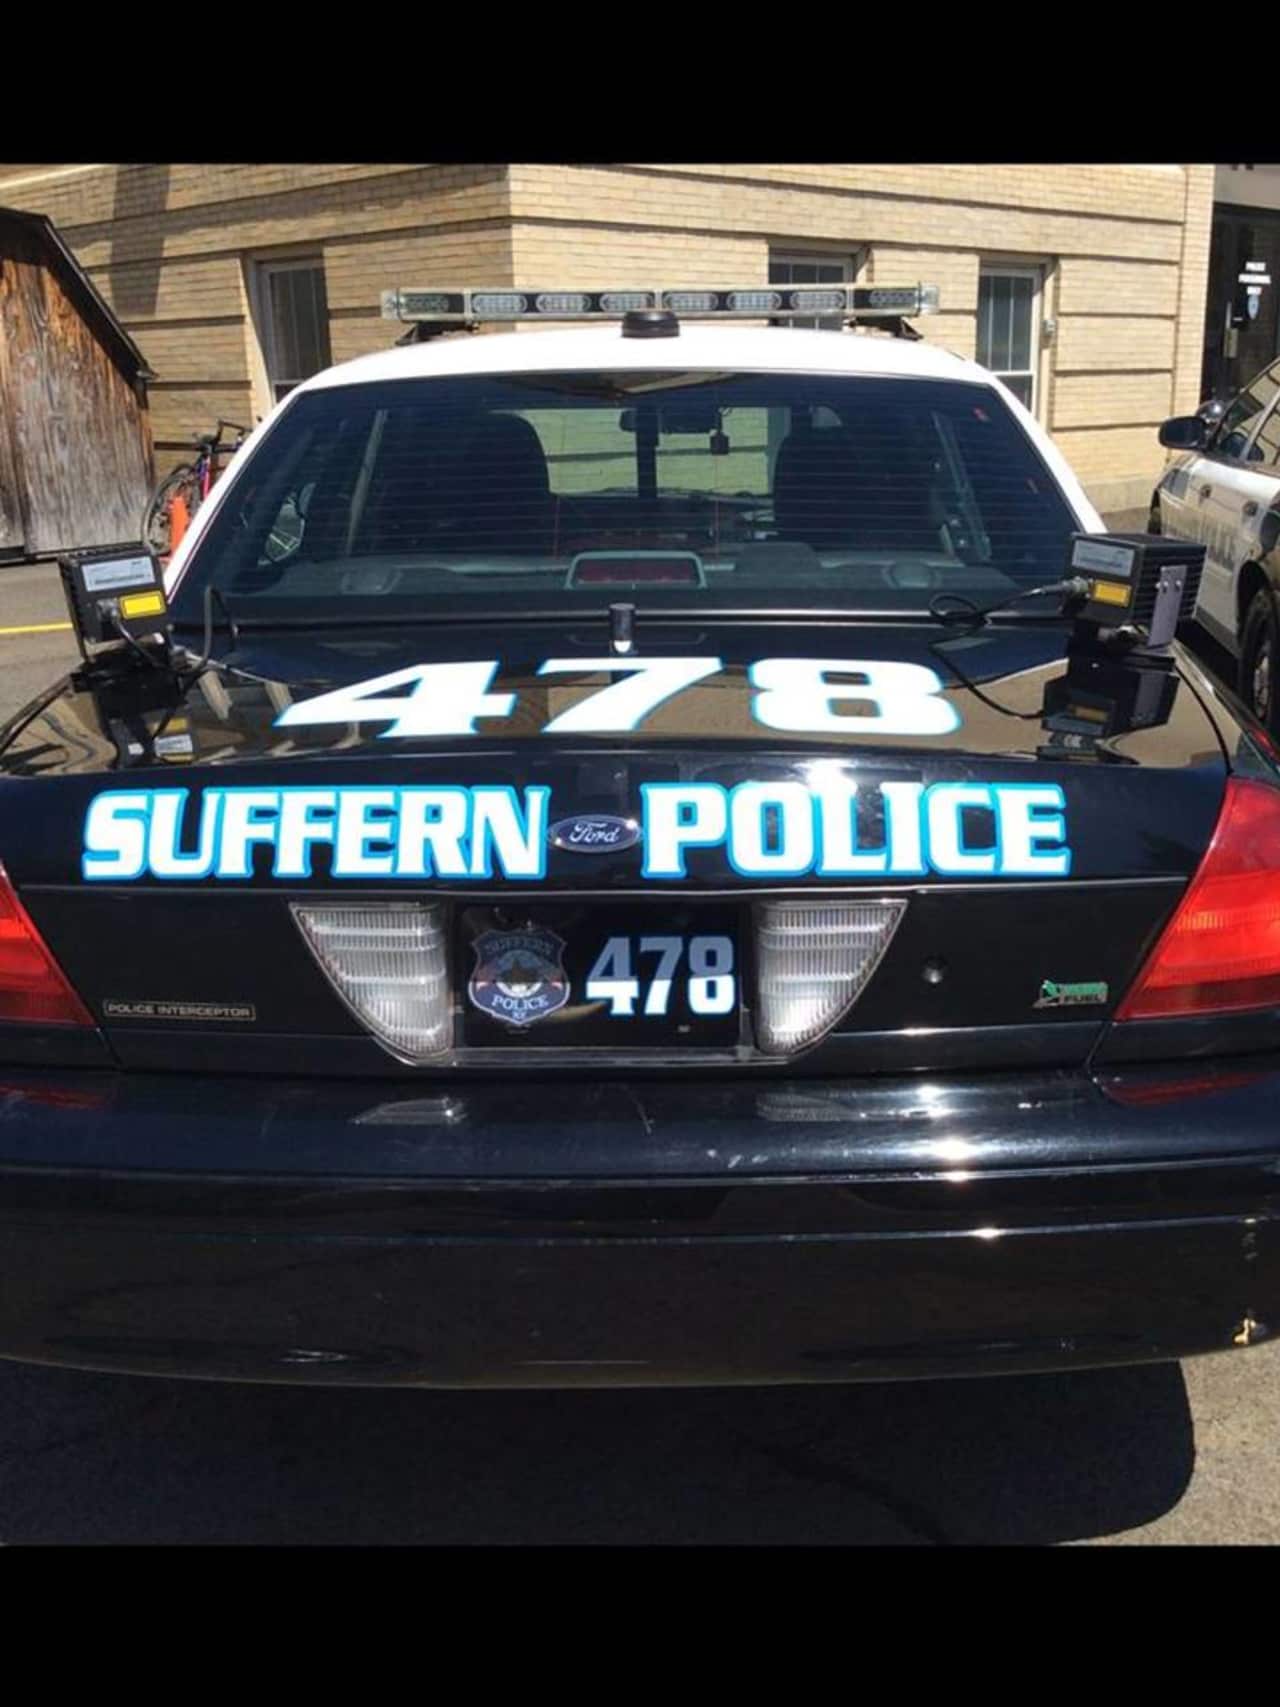 A Suffern police investigation of a fight at an apartment building on Chestnut Street Wednesday resulted in charges for one of the combatants and citations for code violations for the building's owner.